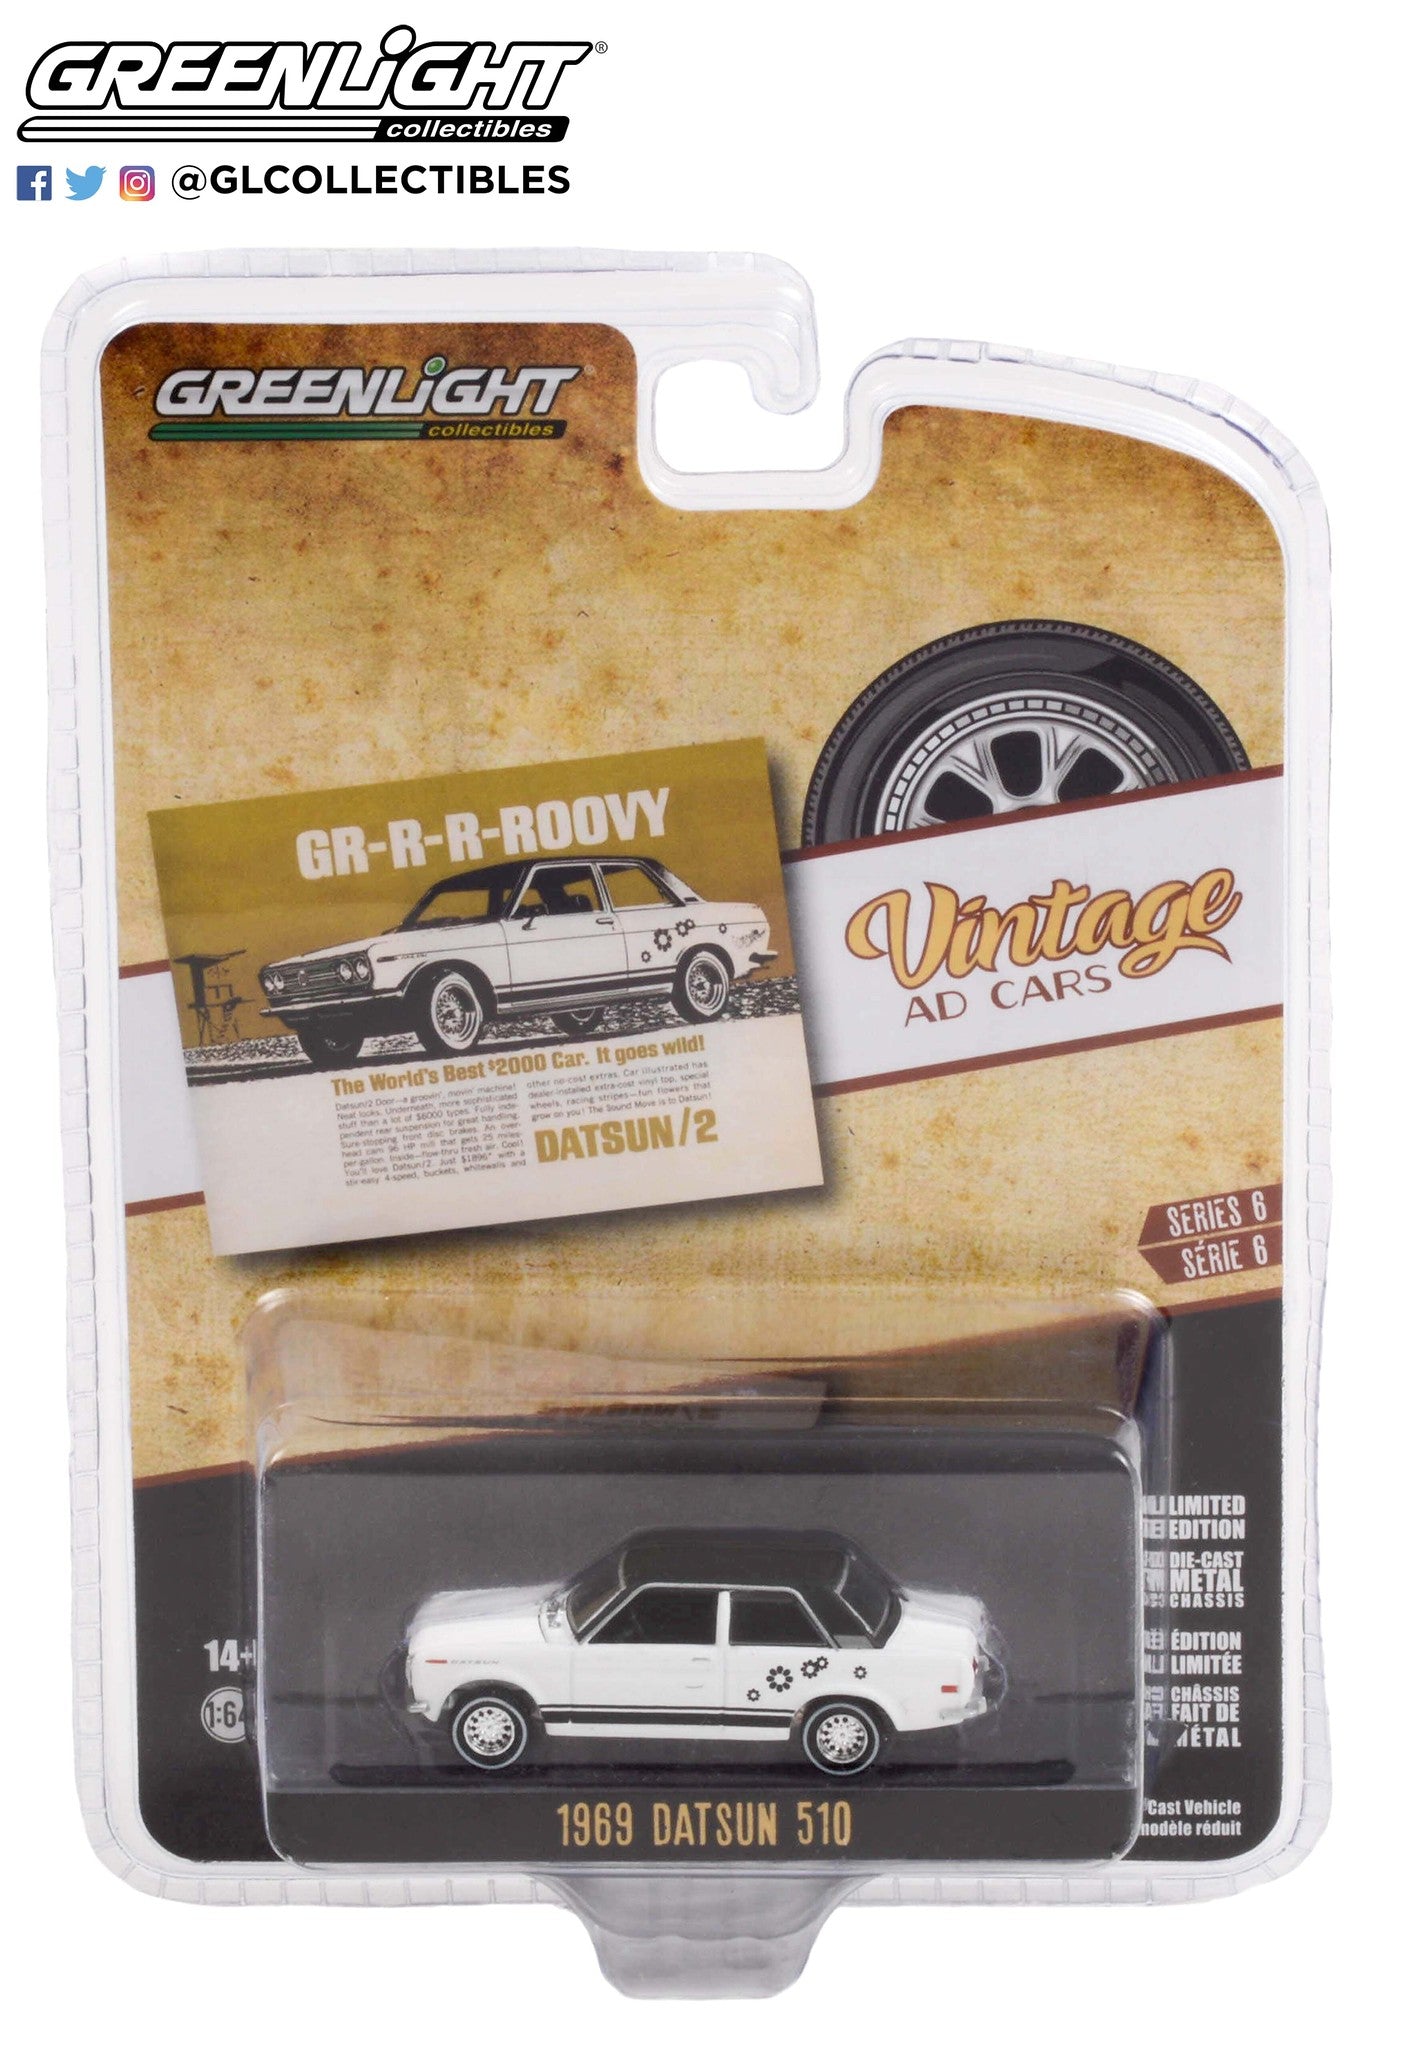 GreenLight 1:64 Vintage Ad Cars Series 6 - 1969 Datsun 510 GR-R-R-ROOVY The World s Best $2000 Car. It Goes Wild! 39090-A